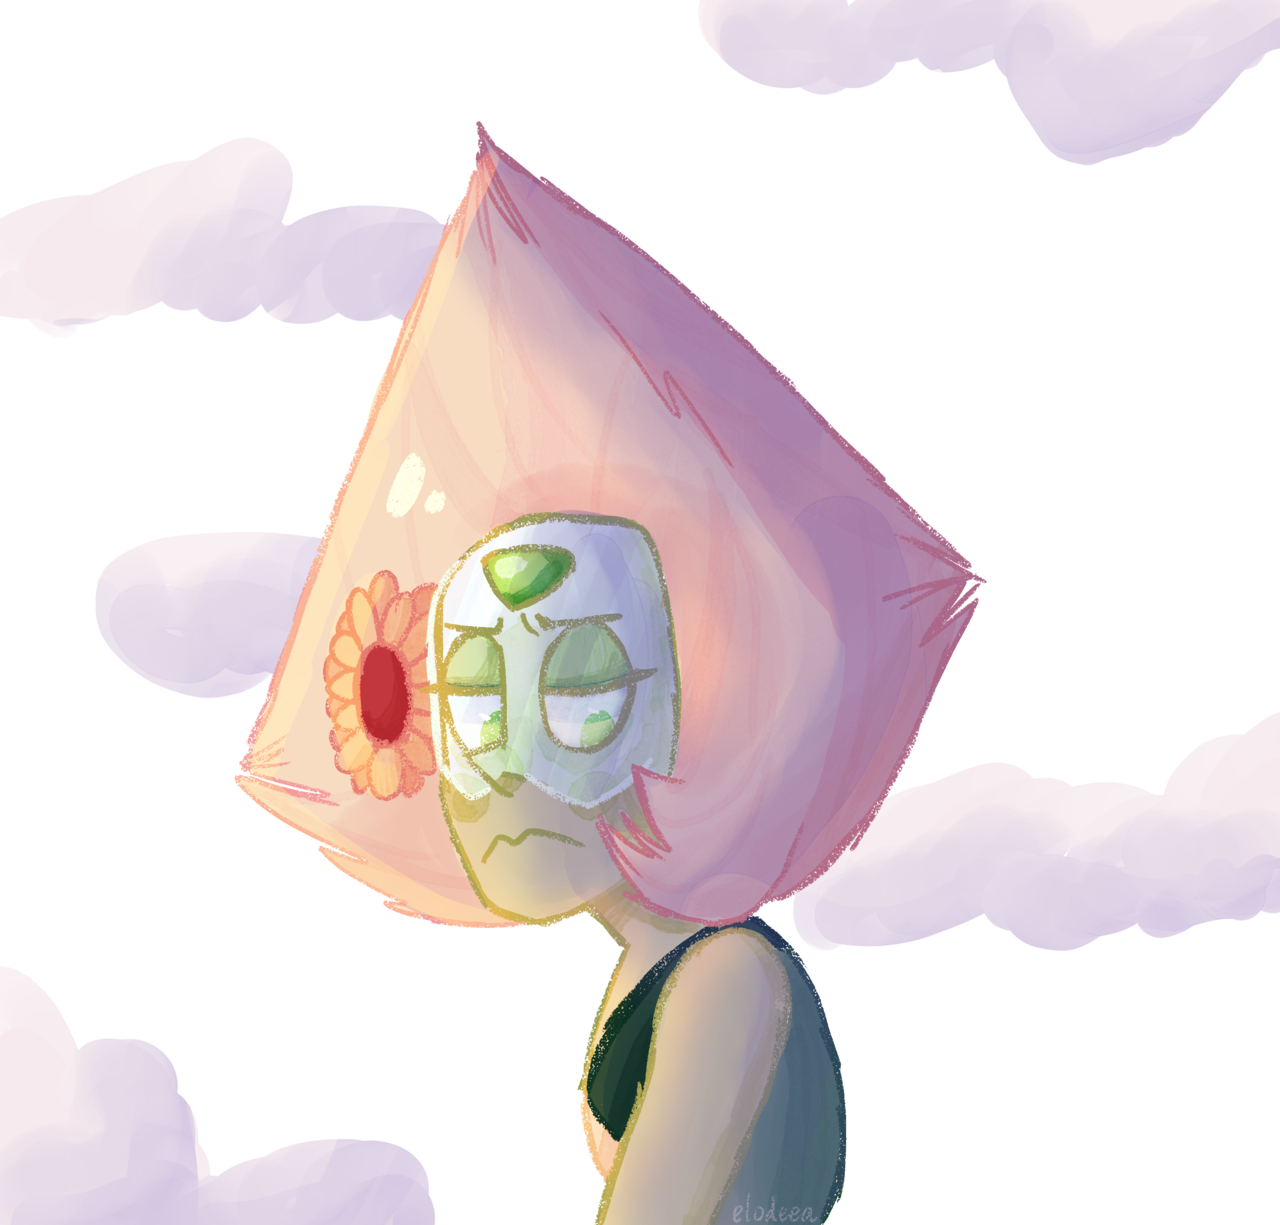 I got a sudden burst of inspiration and drew this since I haven’t drawn a sad expression yet or Peridot. Actually really proud of how this came out for once!